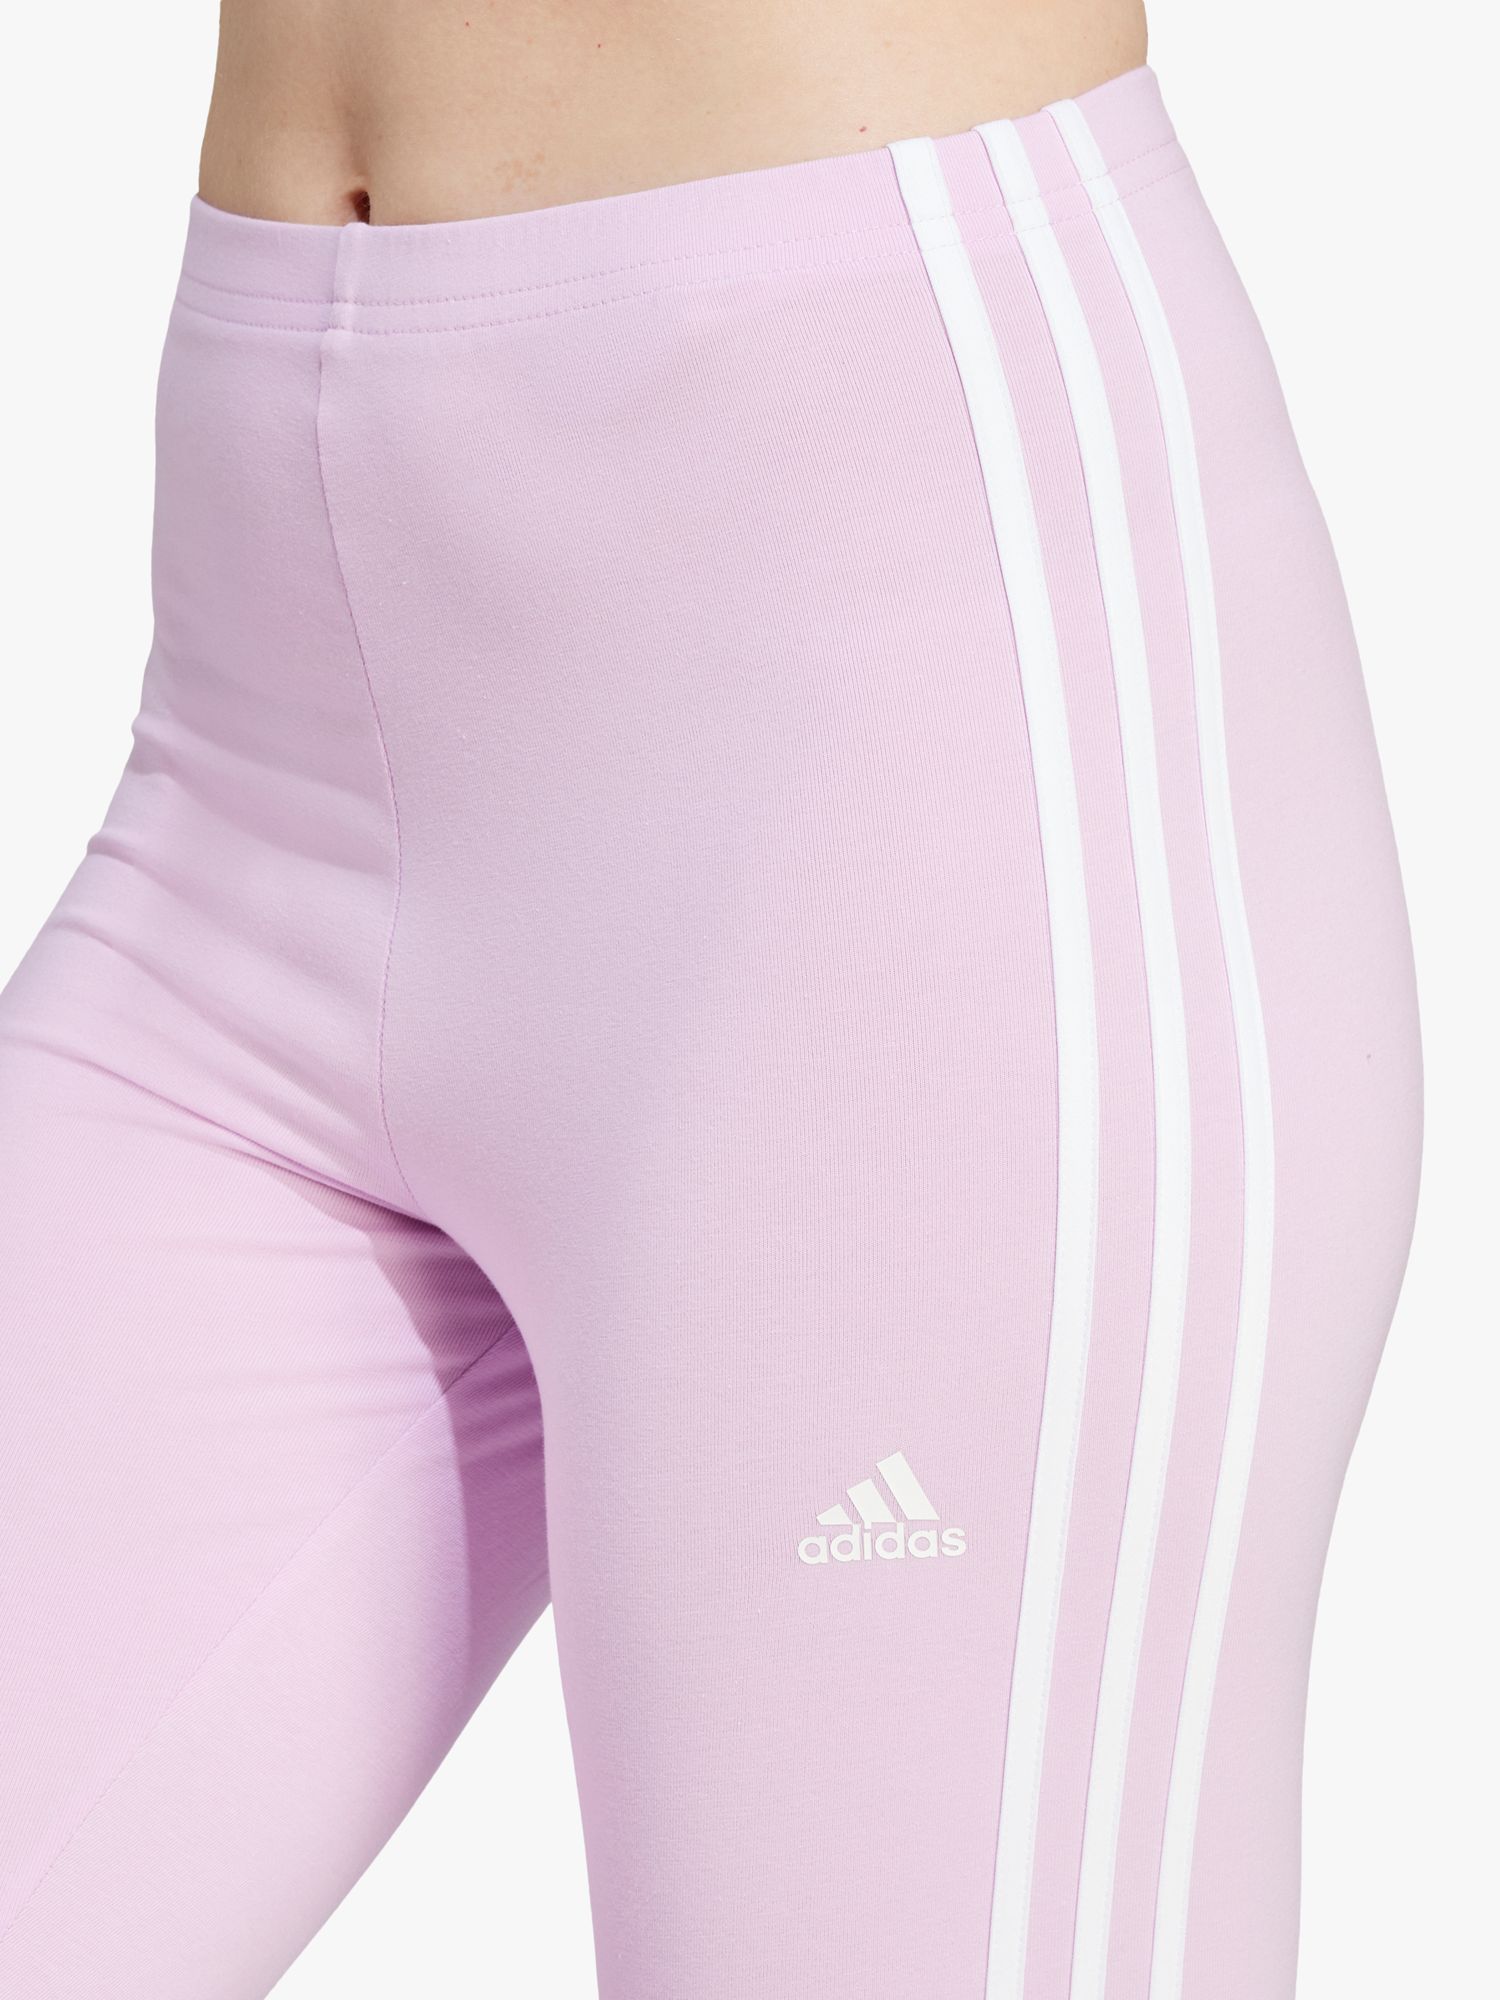 adidas,PRINTED 3-STRIPES HIGH WAISTED TIGHTS,almost pink/white,S/P